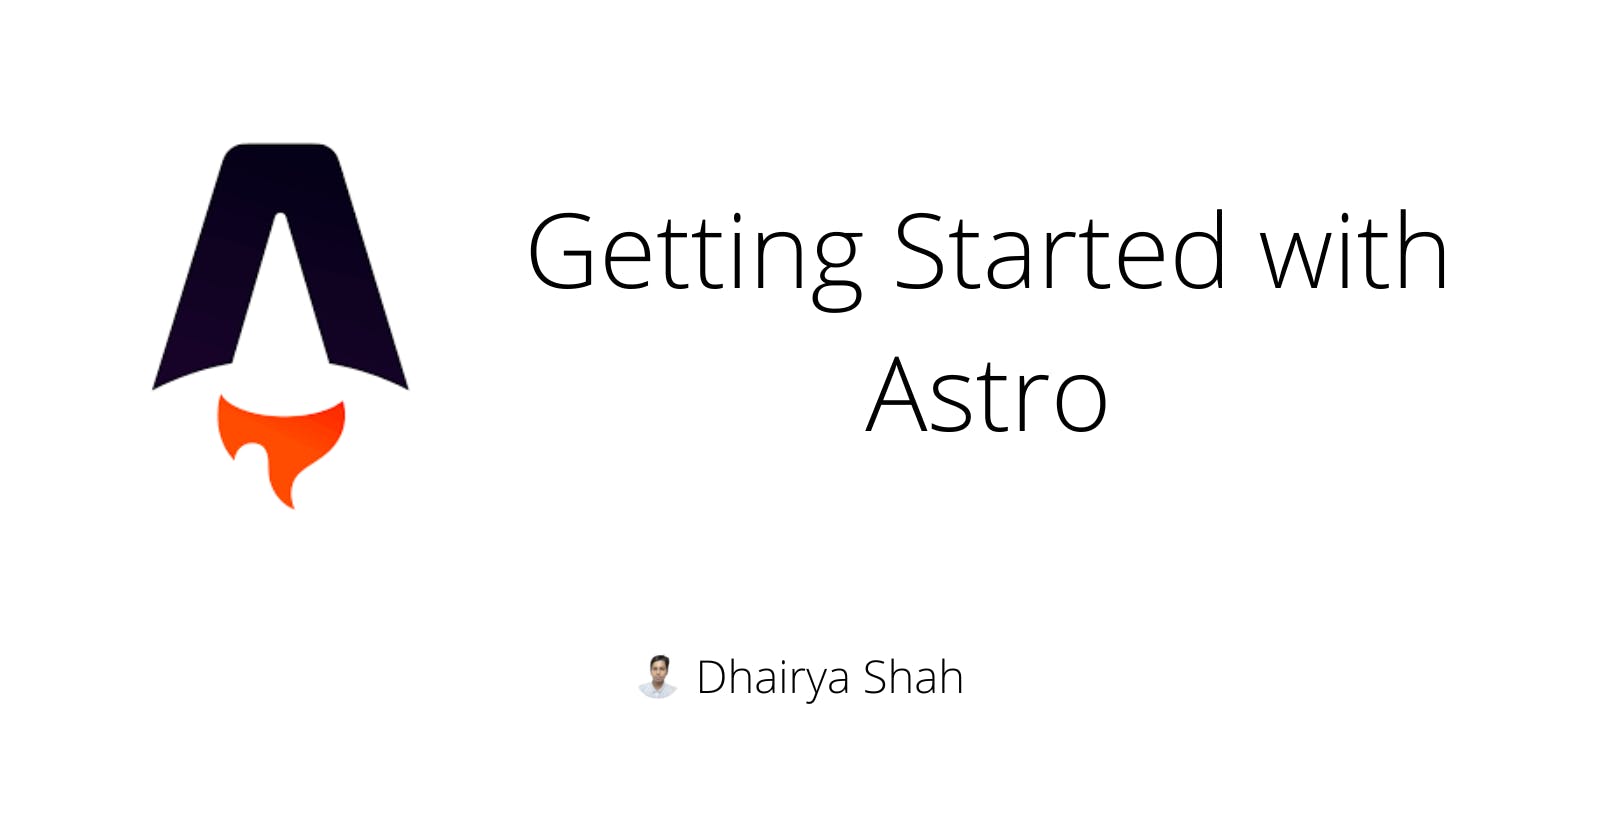 Getting started with Astro